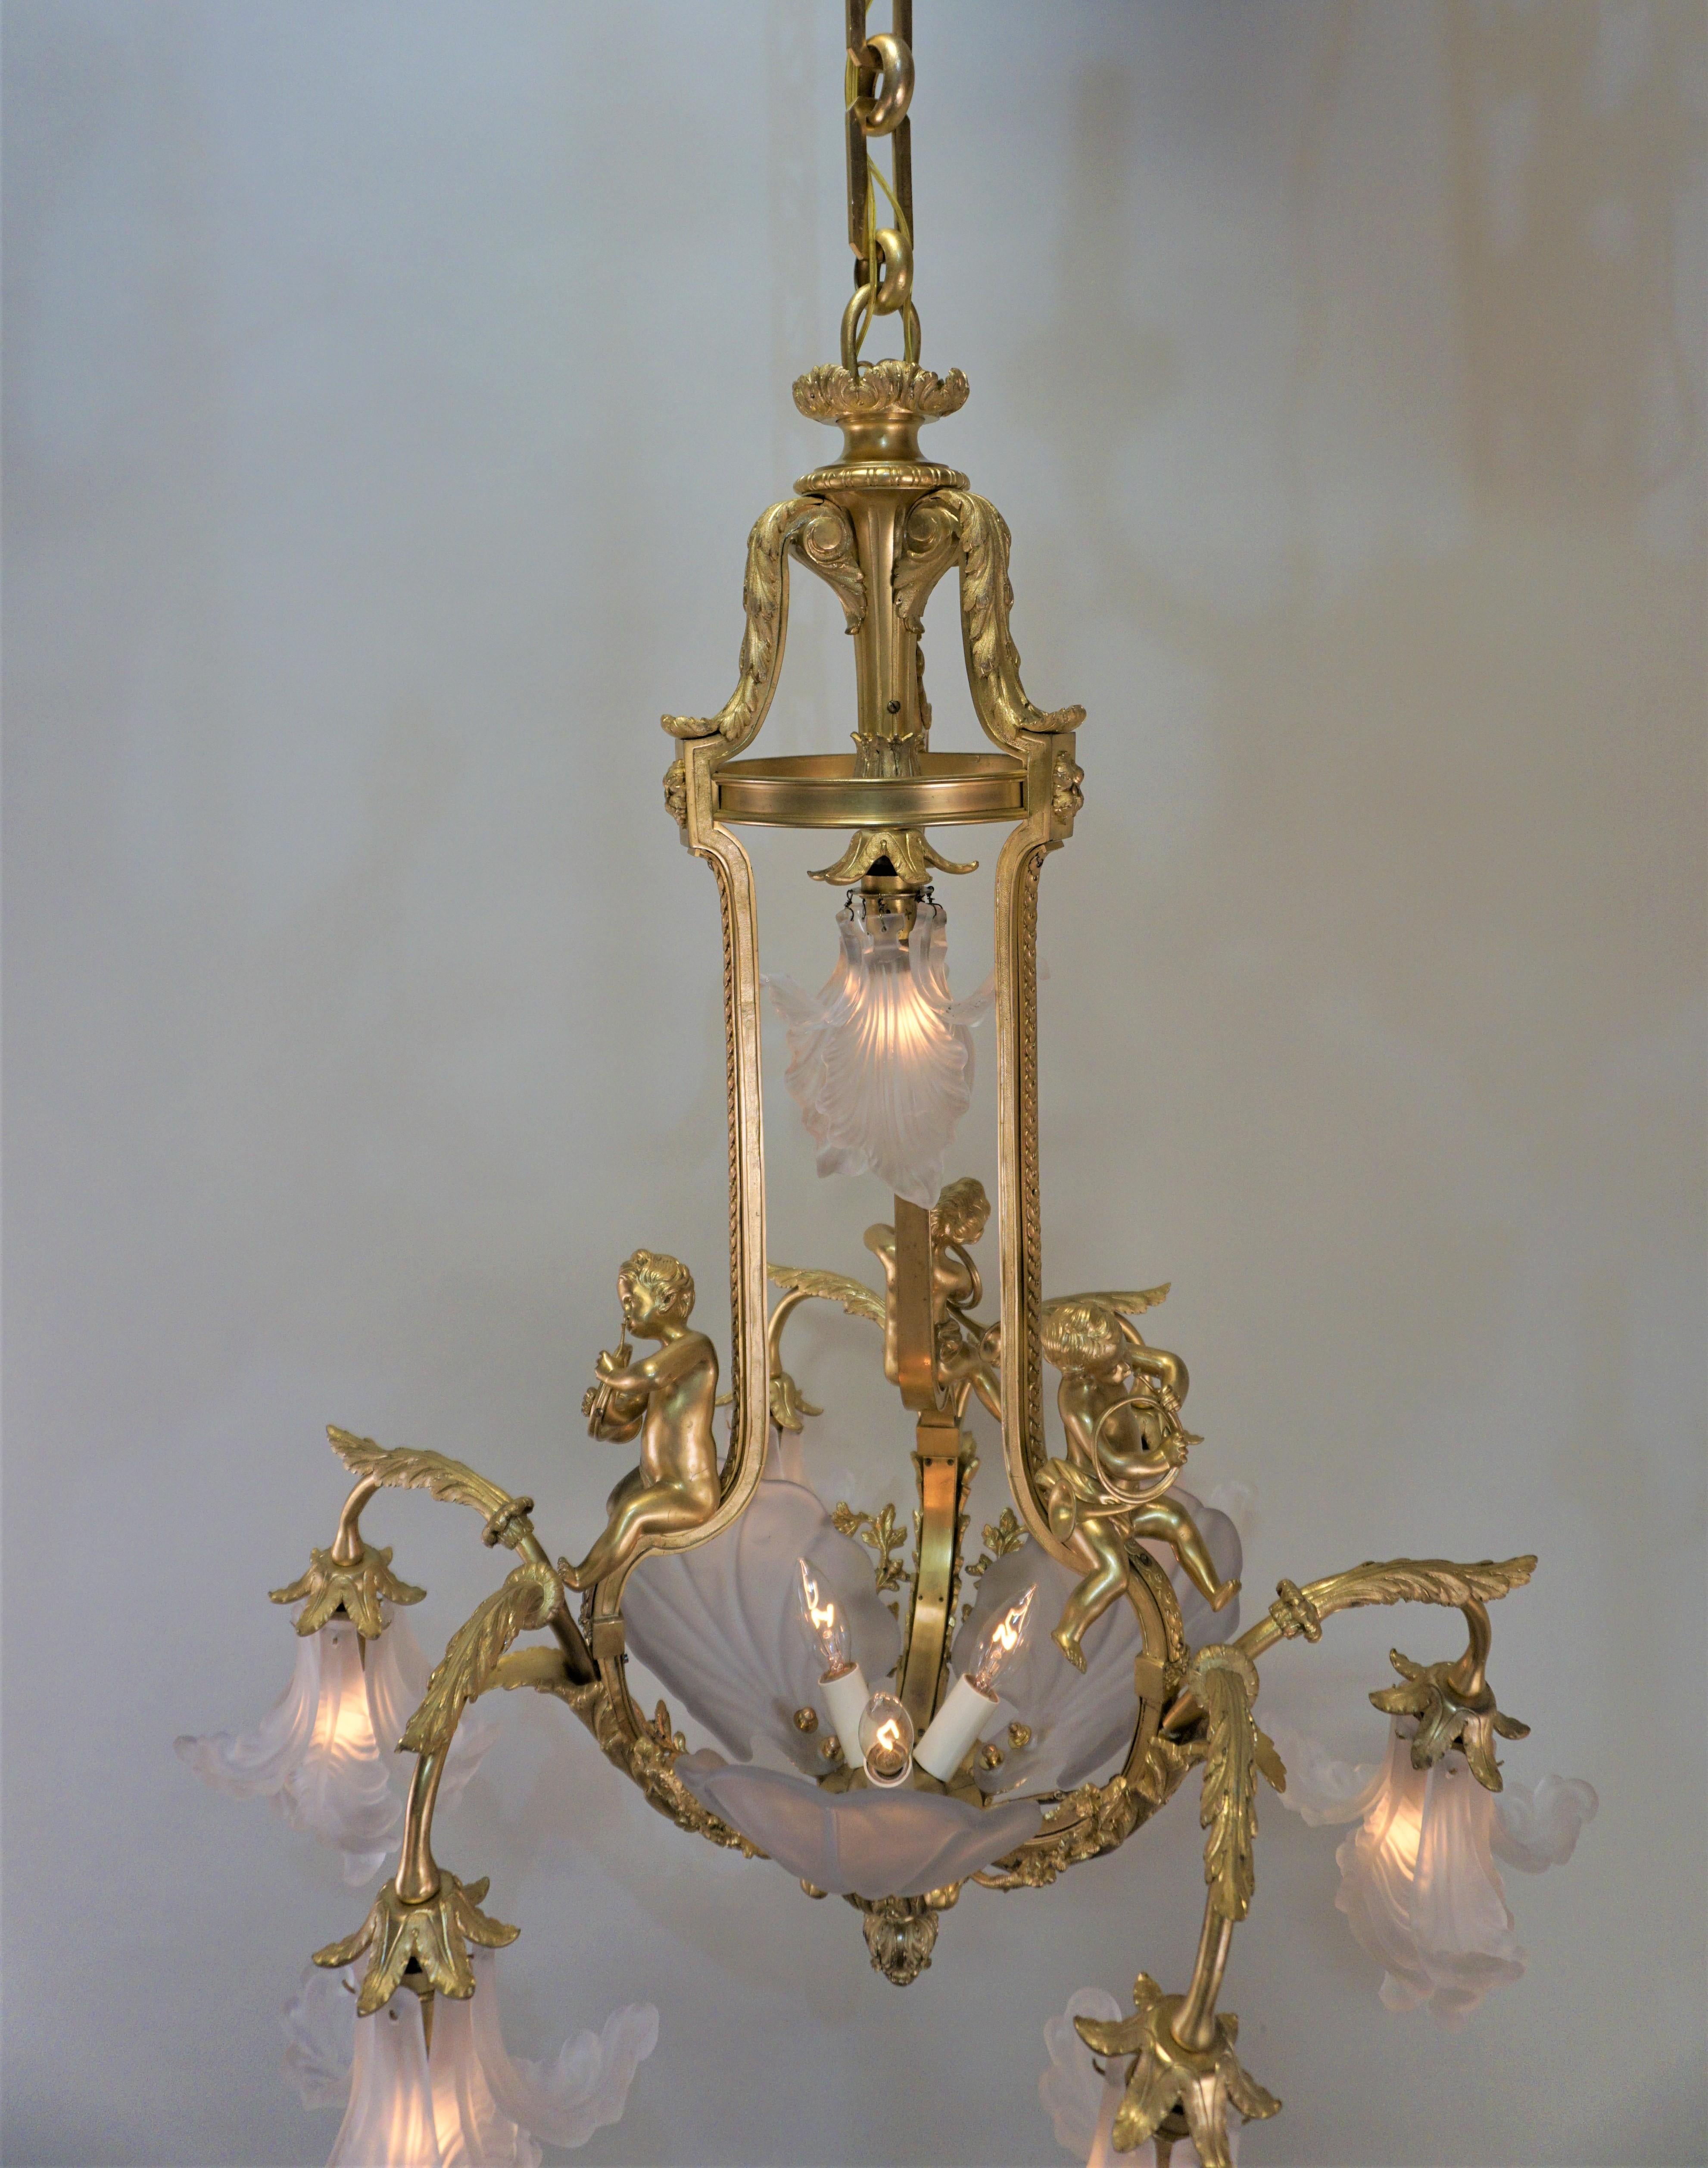 Important French Gilt Bronze Chandelier, Early 20th Century by E. Mottheau 3